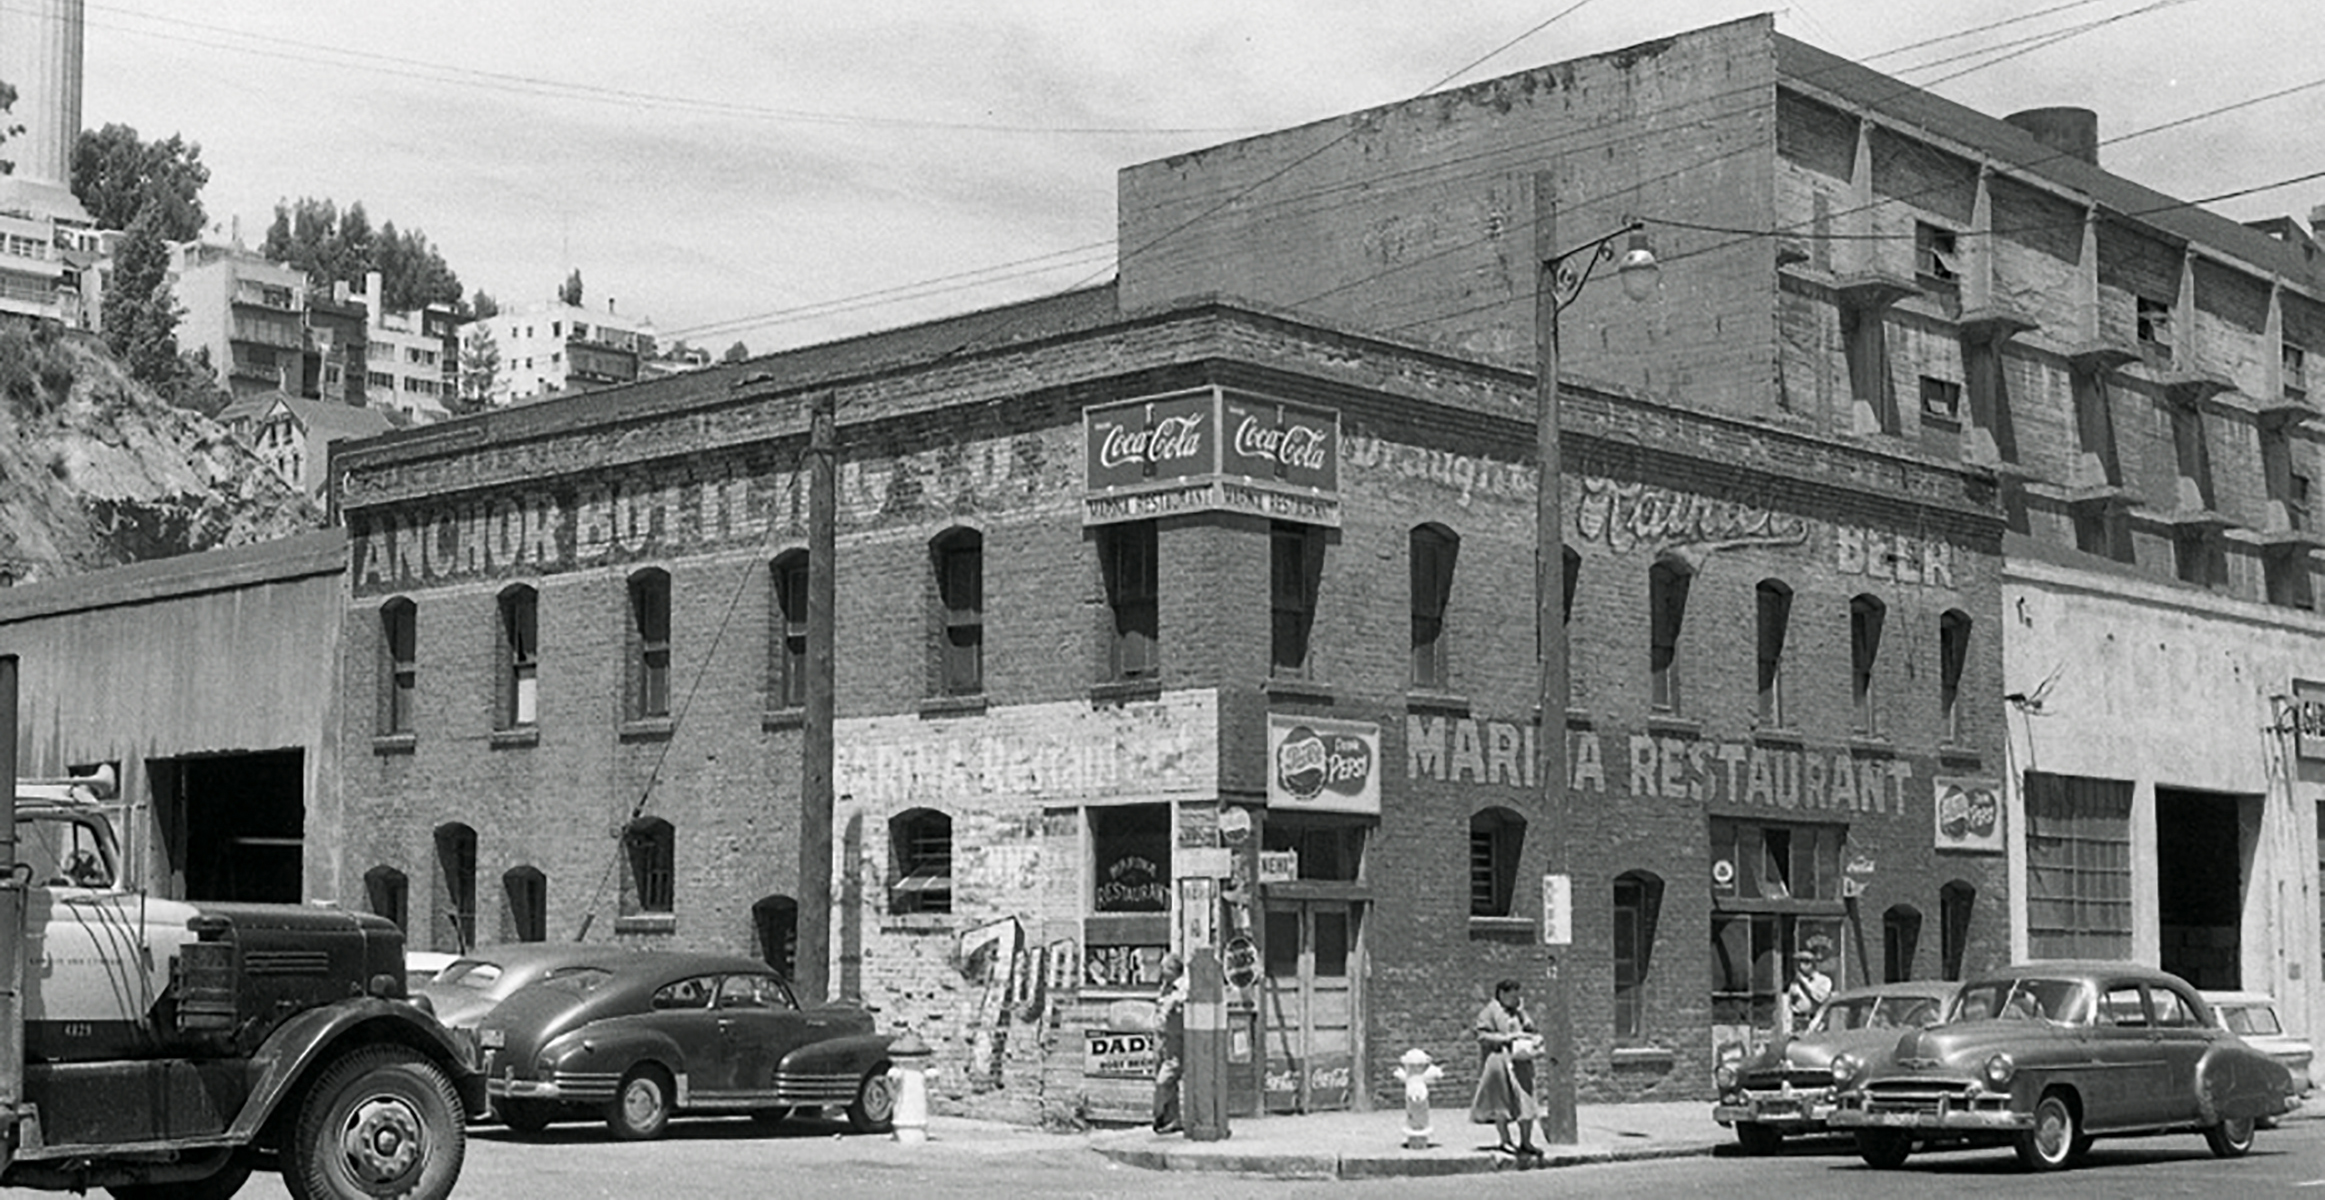 Exterior of 1105 Battery Street in San Francisco CA in 1959